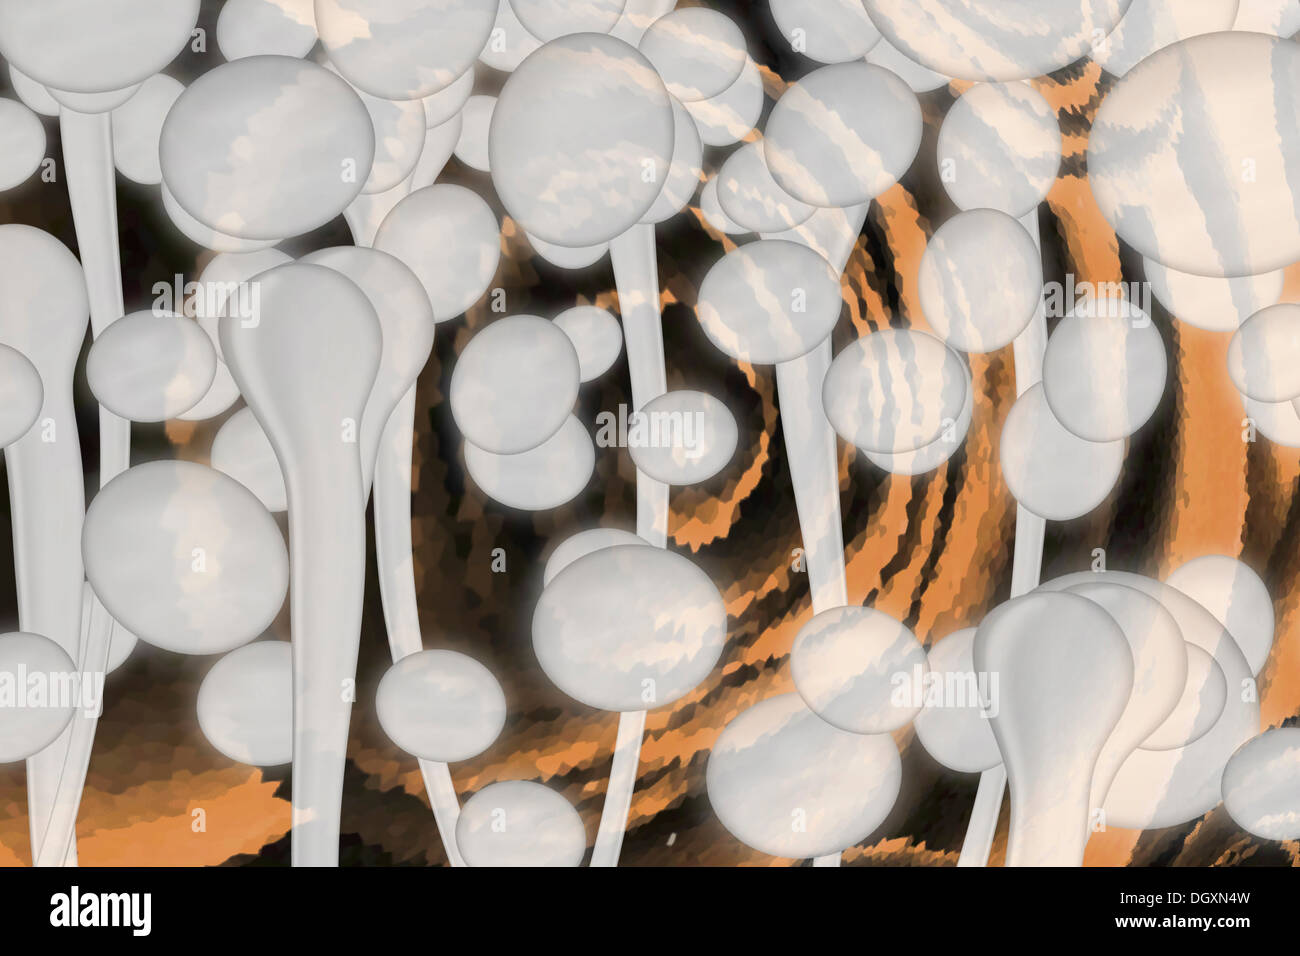 Yeast cells, fungal spores, illustration Stock Photo